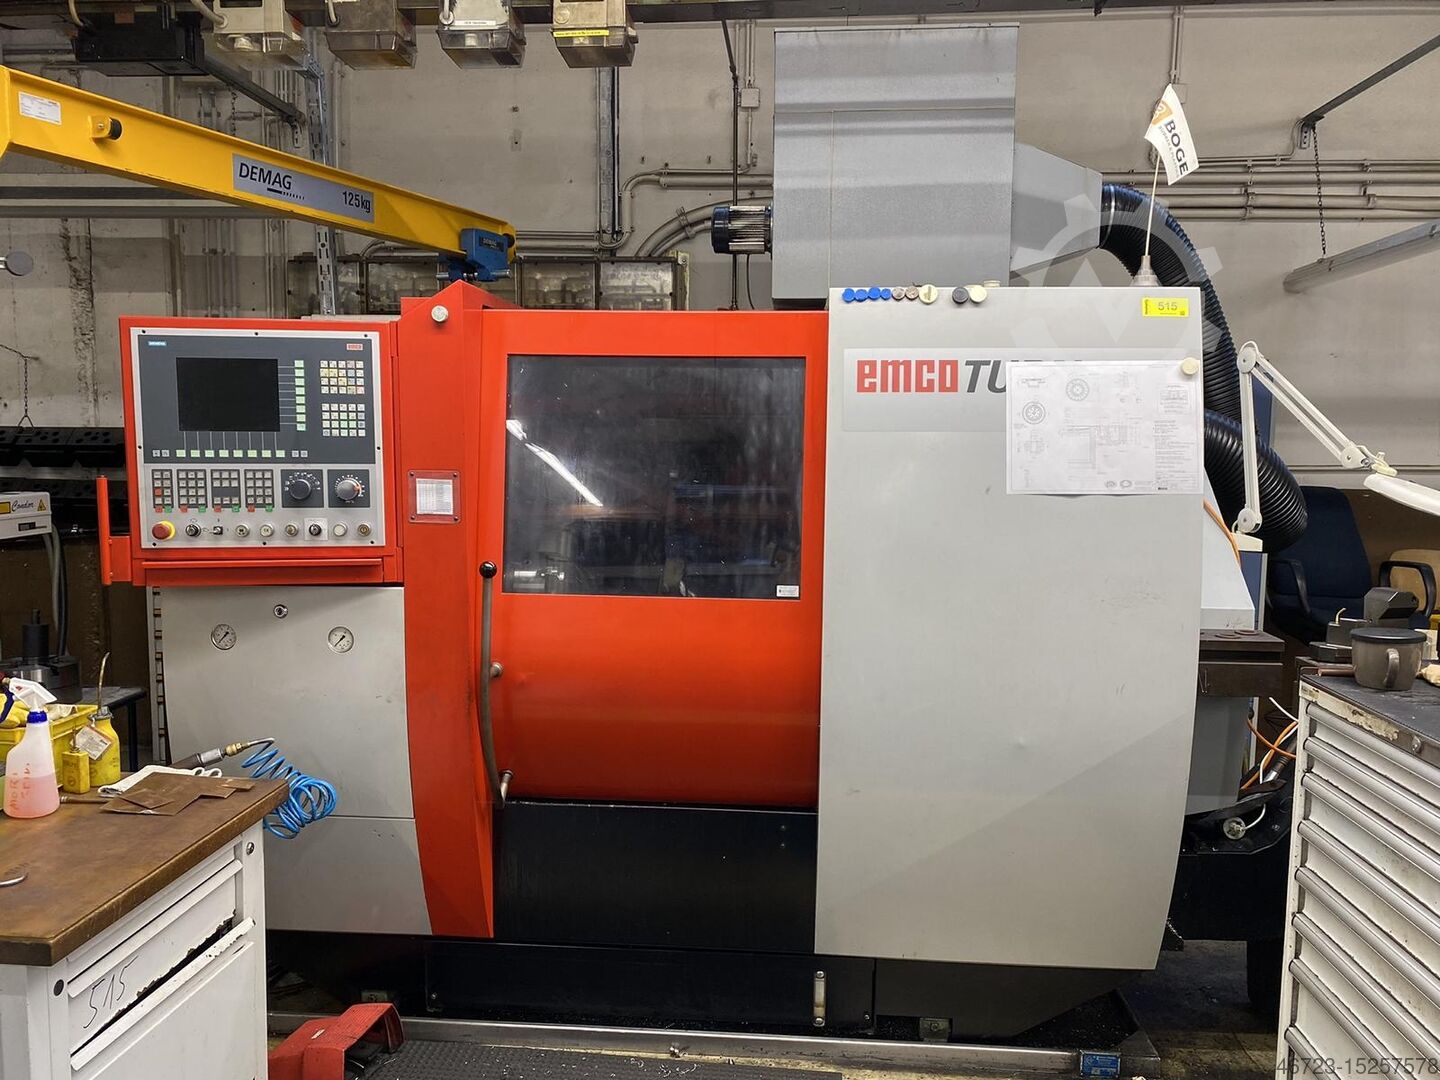 Fanuc Series 31i: EMCO lathes and milling machines for CNC turning